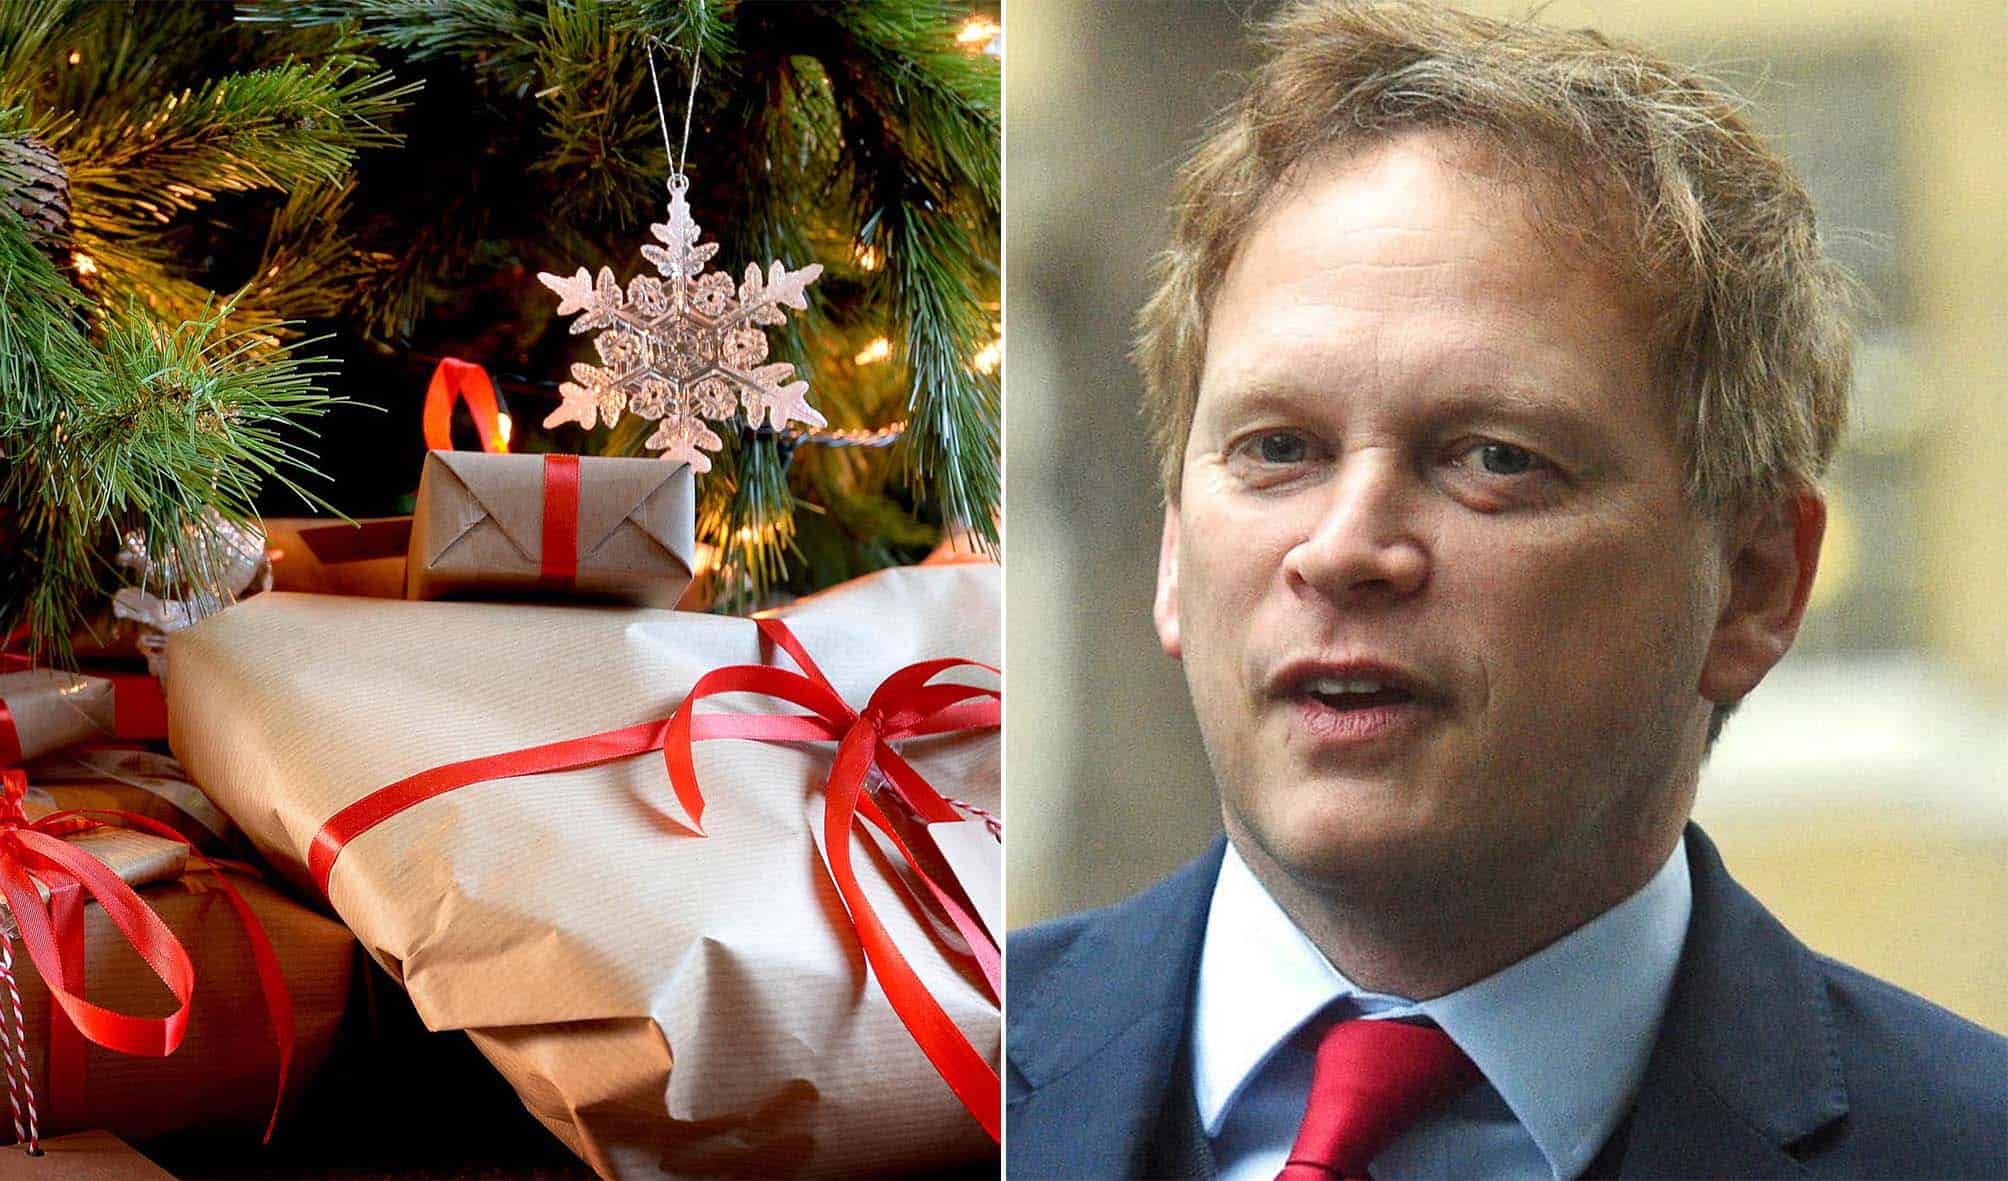 Bad feeling about this? Covid cases hit 3mth high but Shapps says Xmas WON’T be cancelled